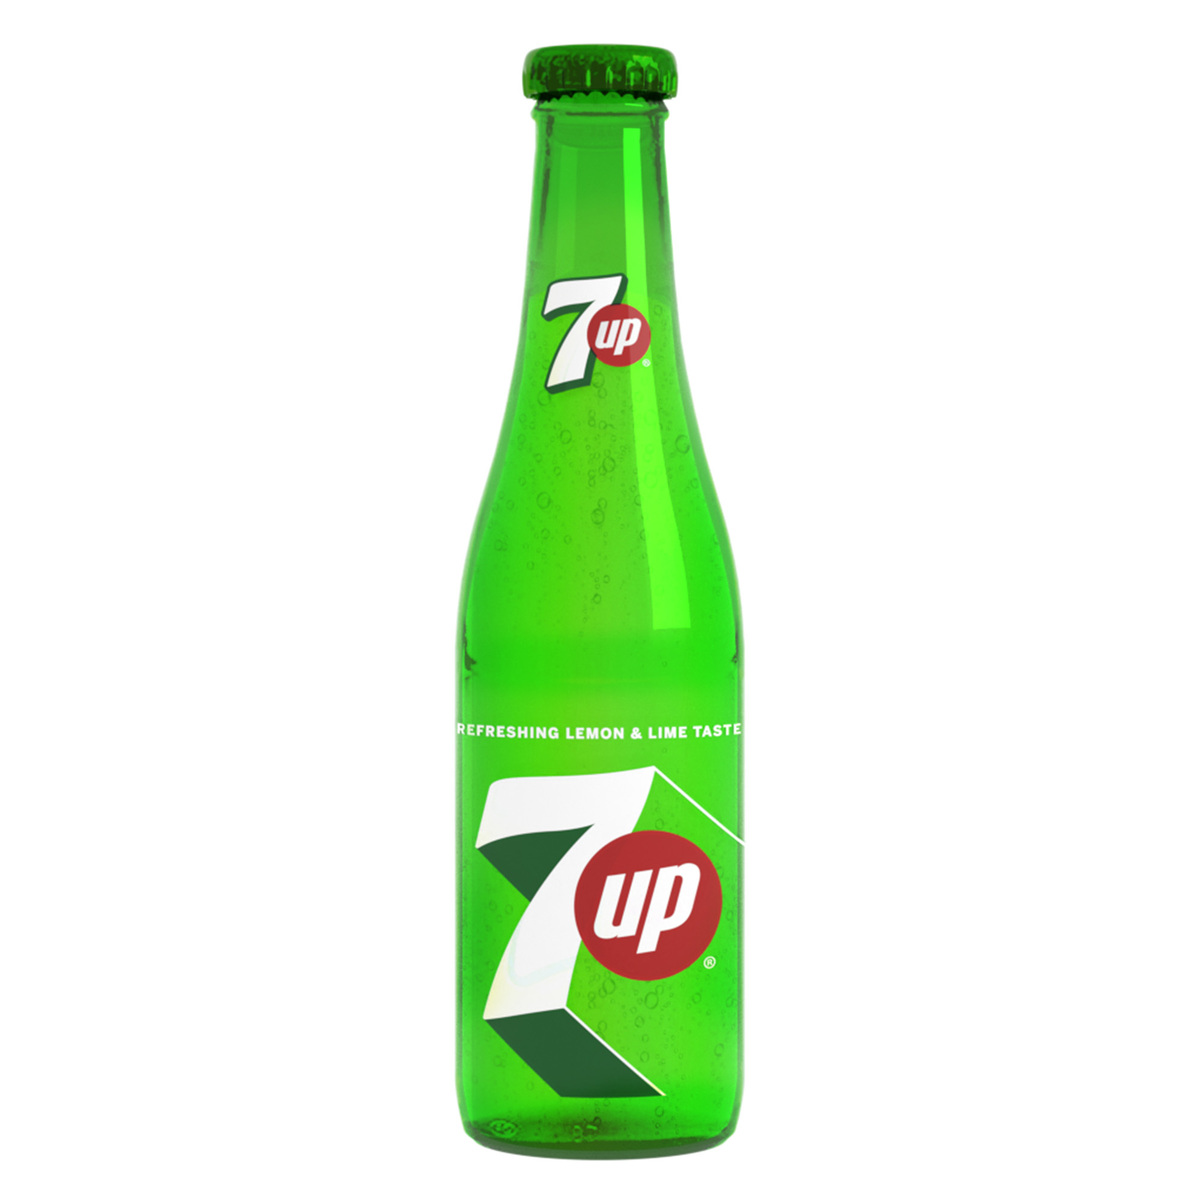 7UP Carbonated Soft Drink Glass Bottle 6 x 250 ml